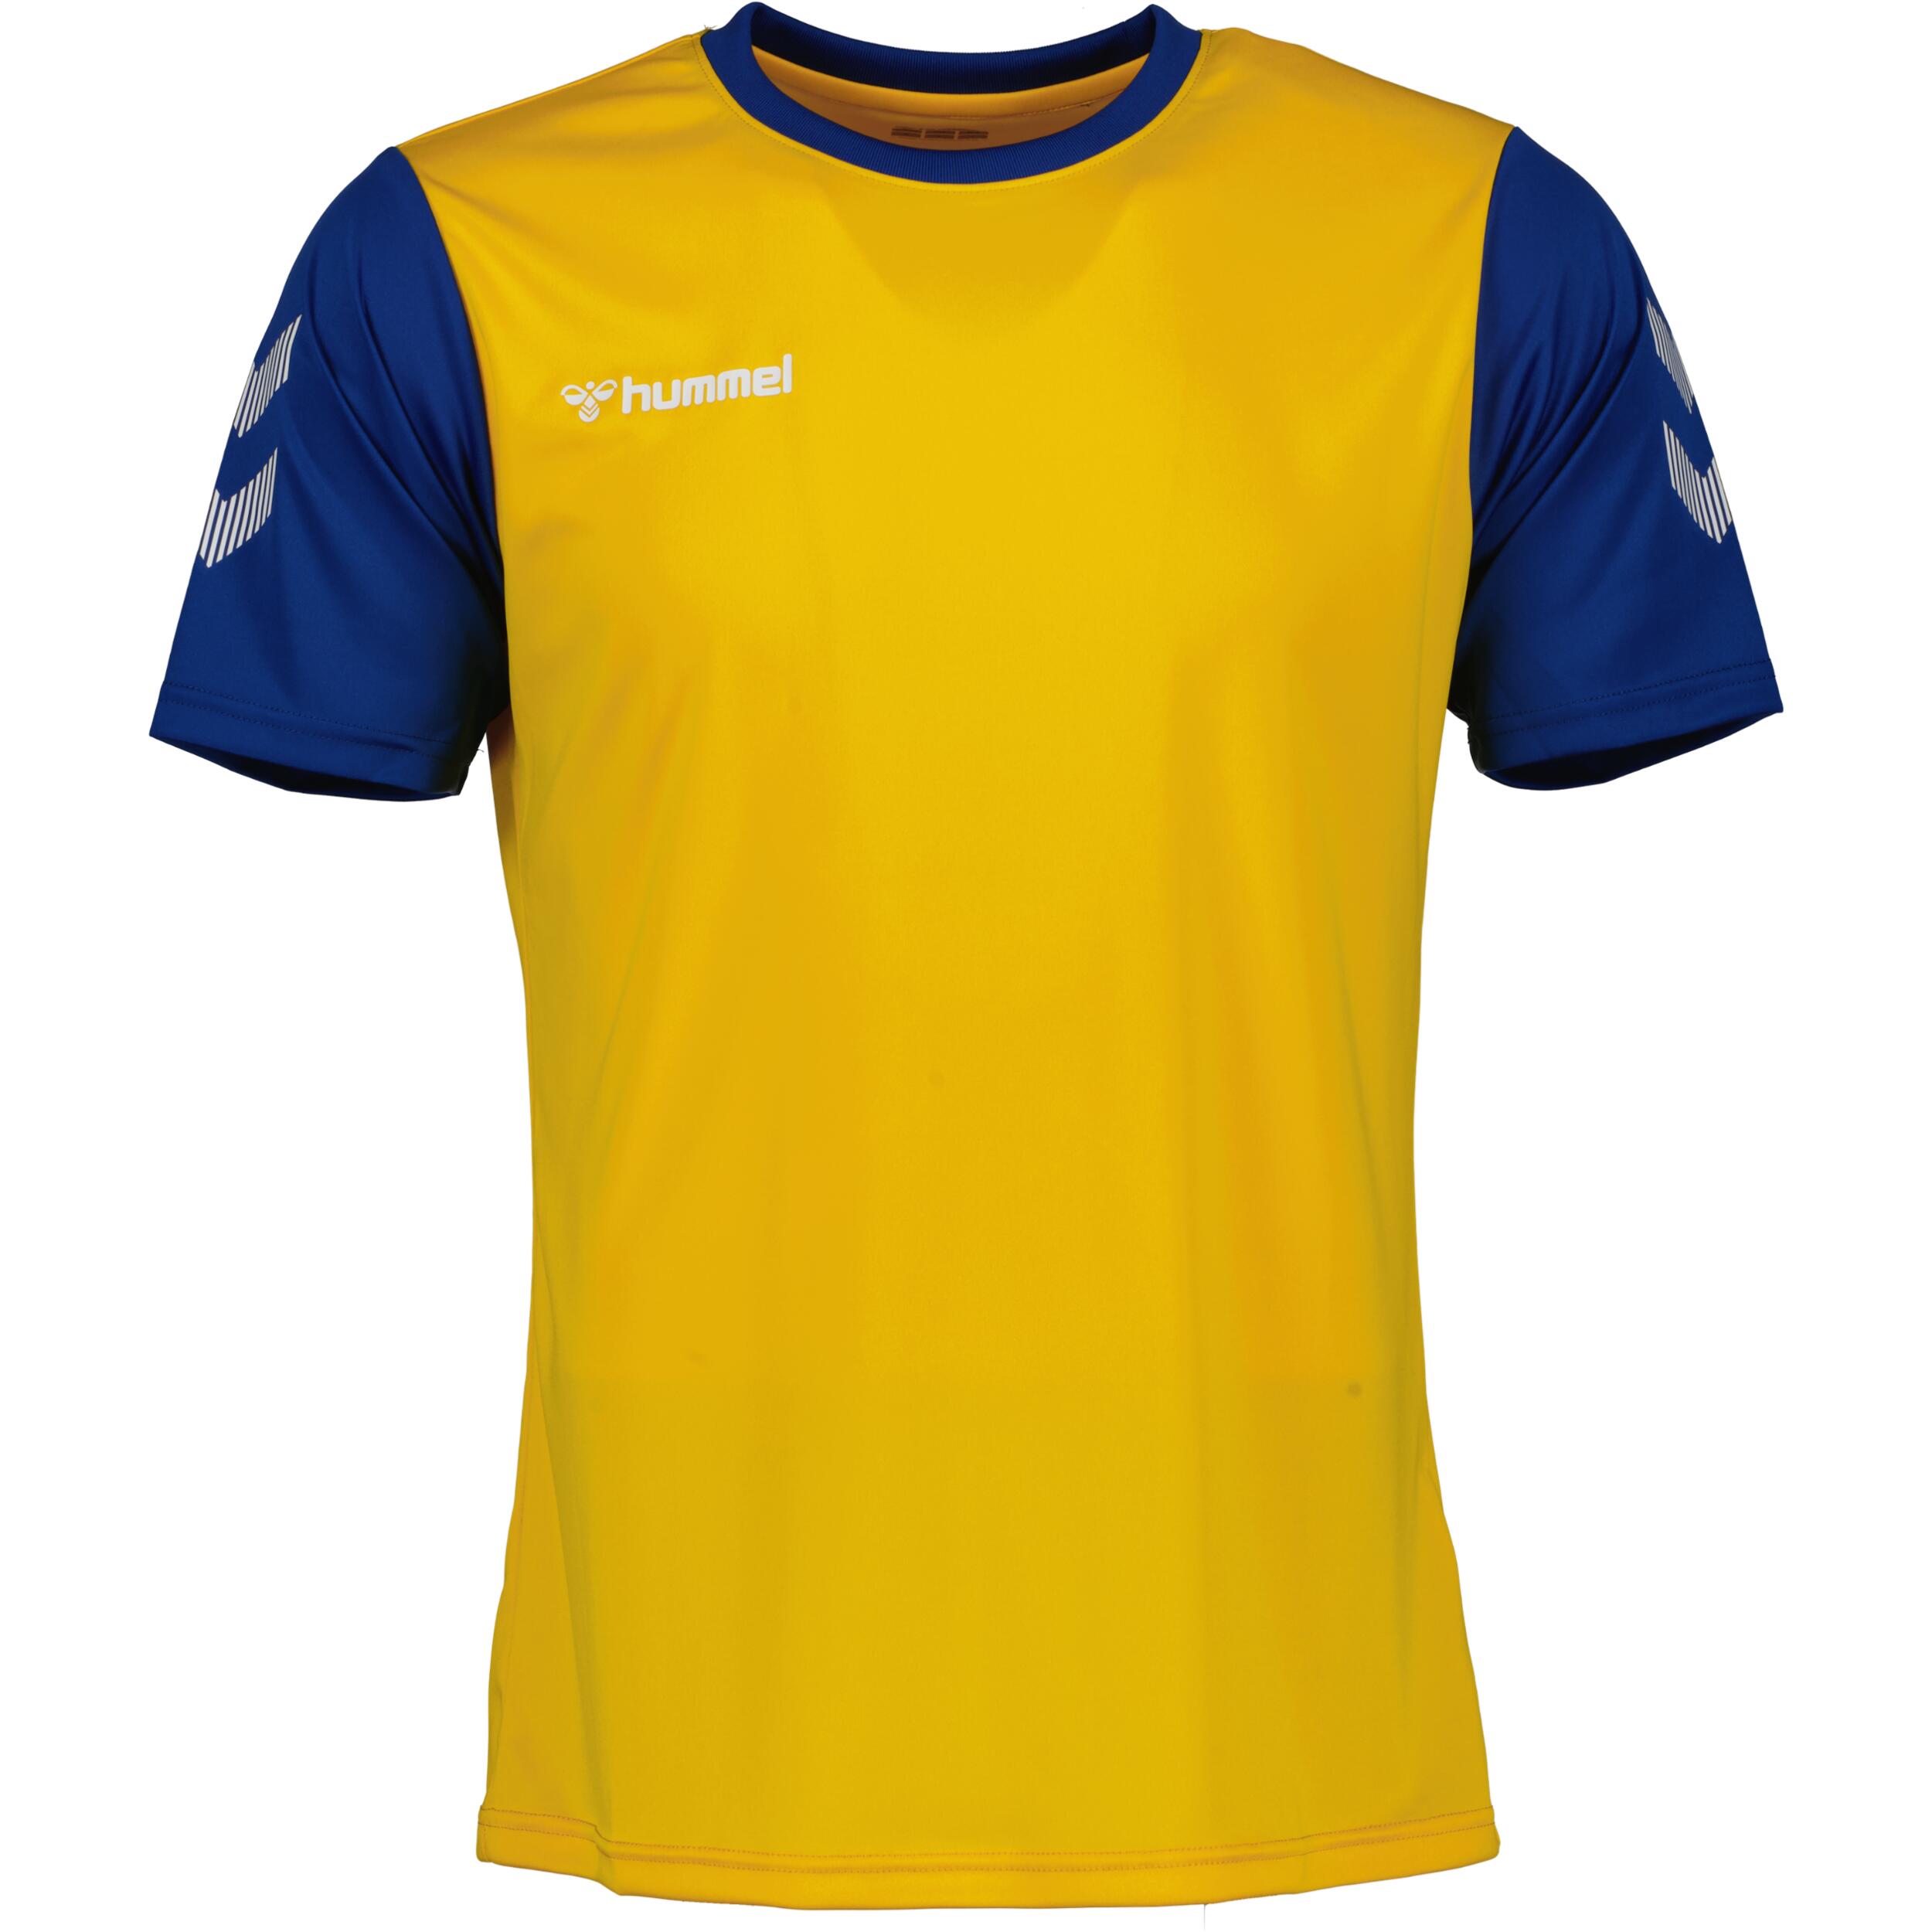 HUMMEL Match jersey for kids, great for football, in yellow/blue